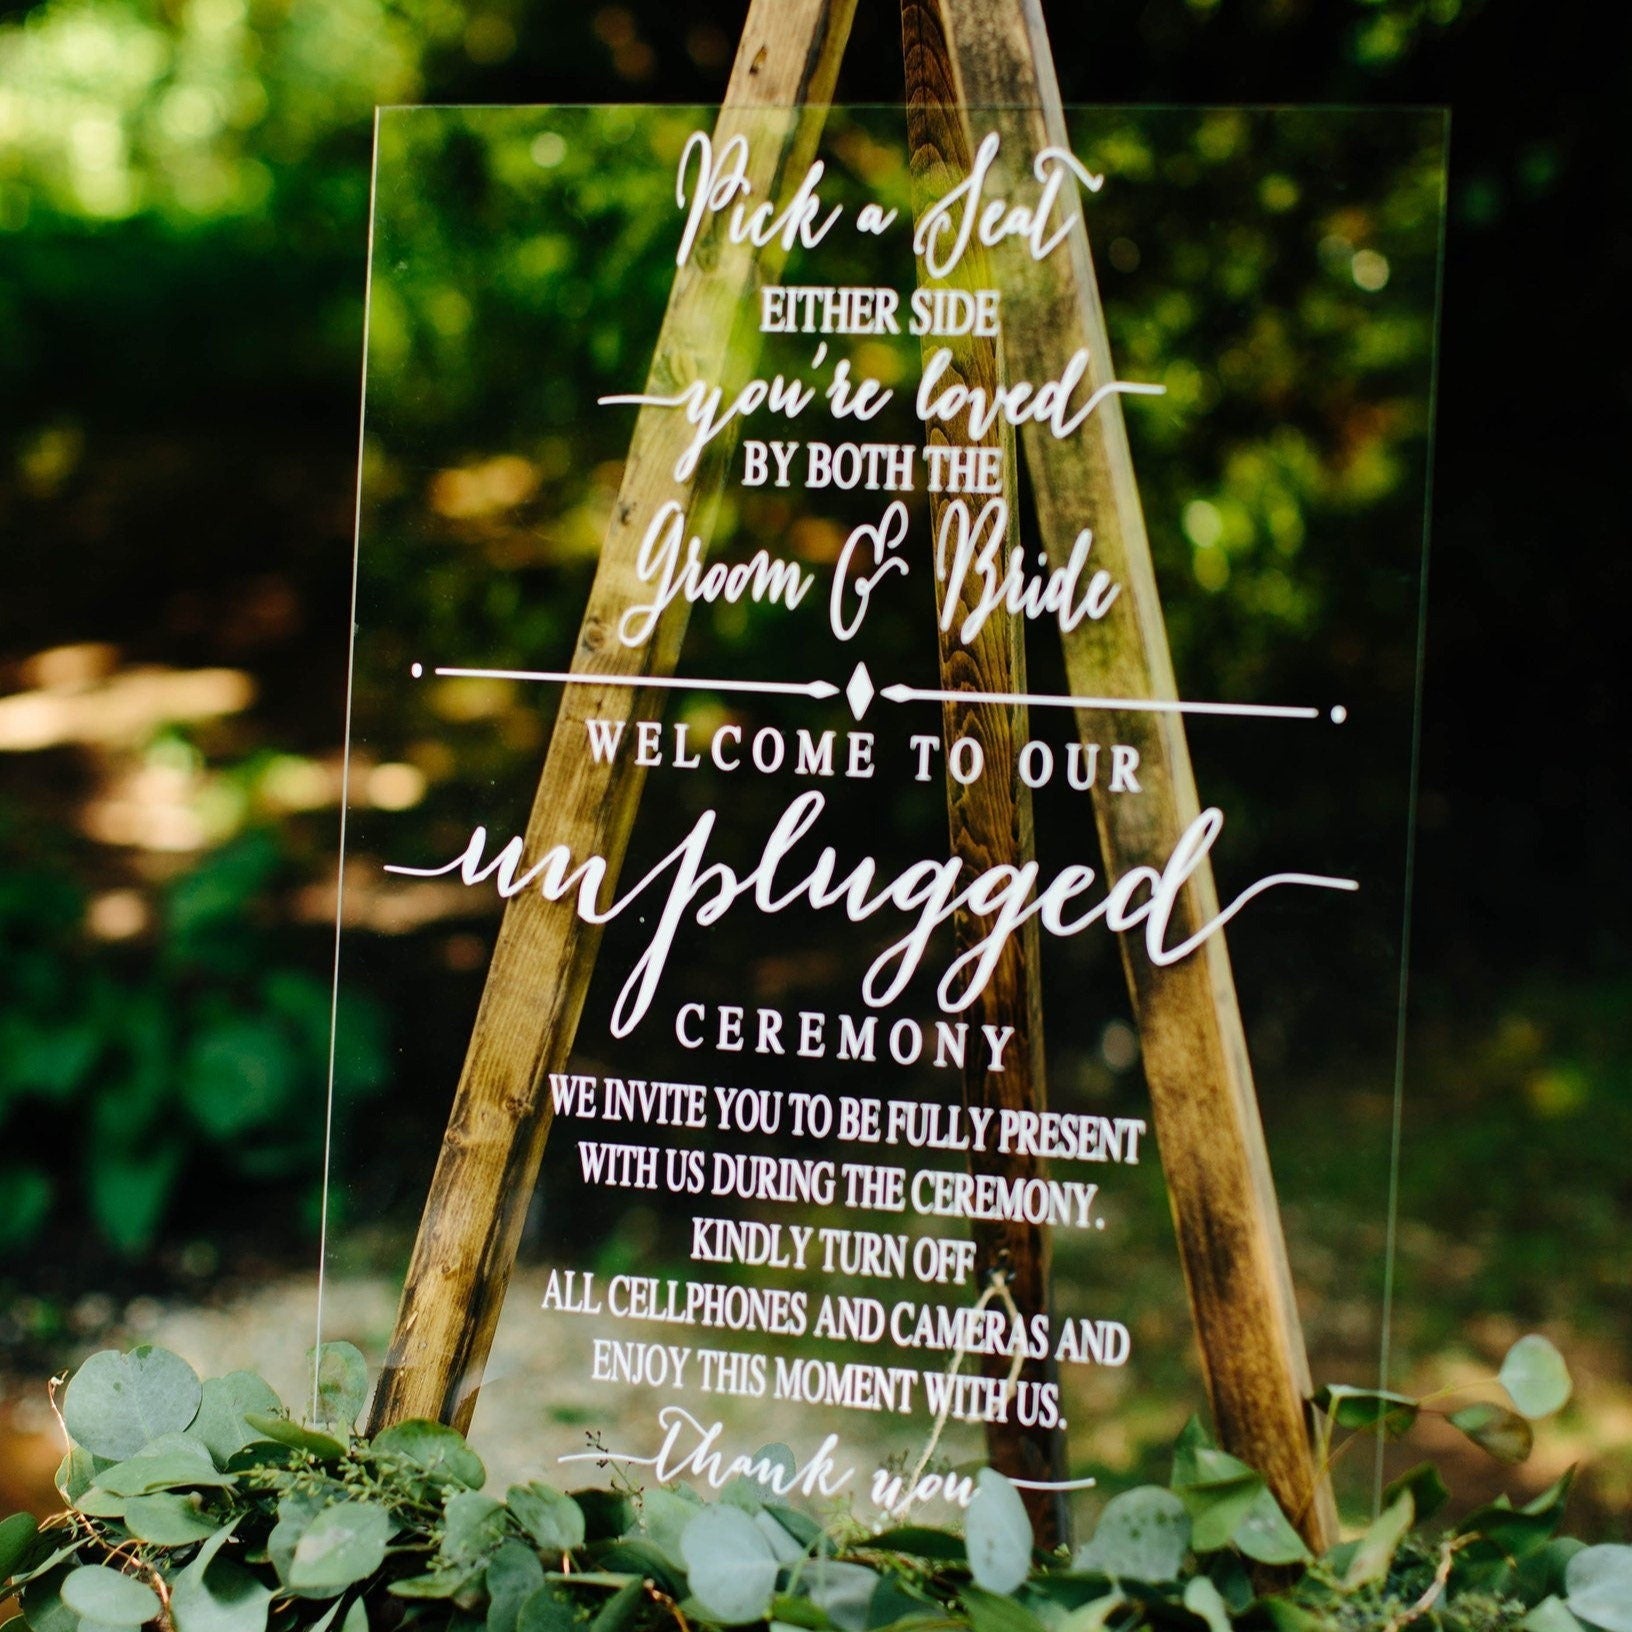 Ceremony Sign Wedding Signs Choose a seat Sign rustic wedding